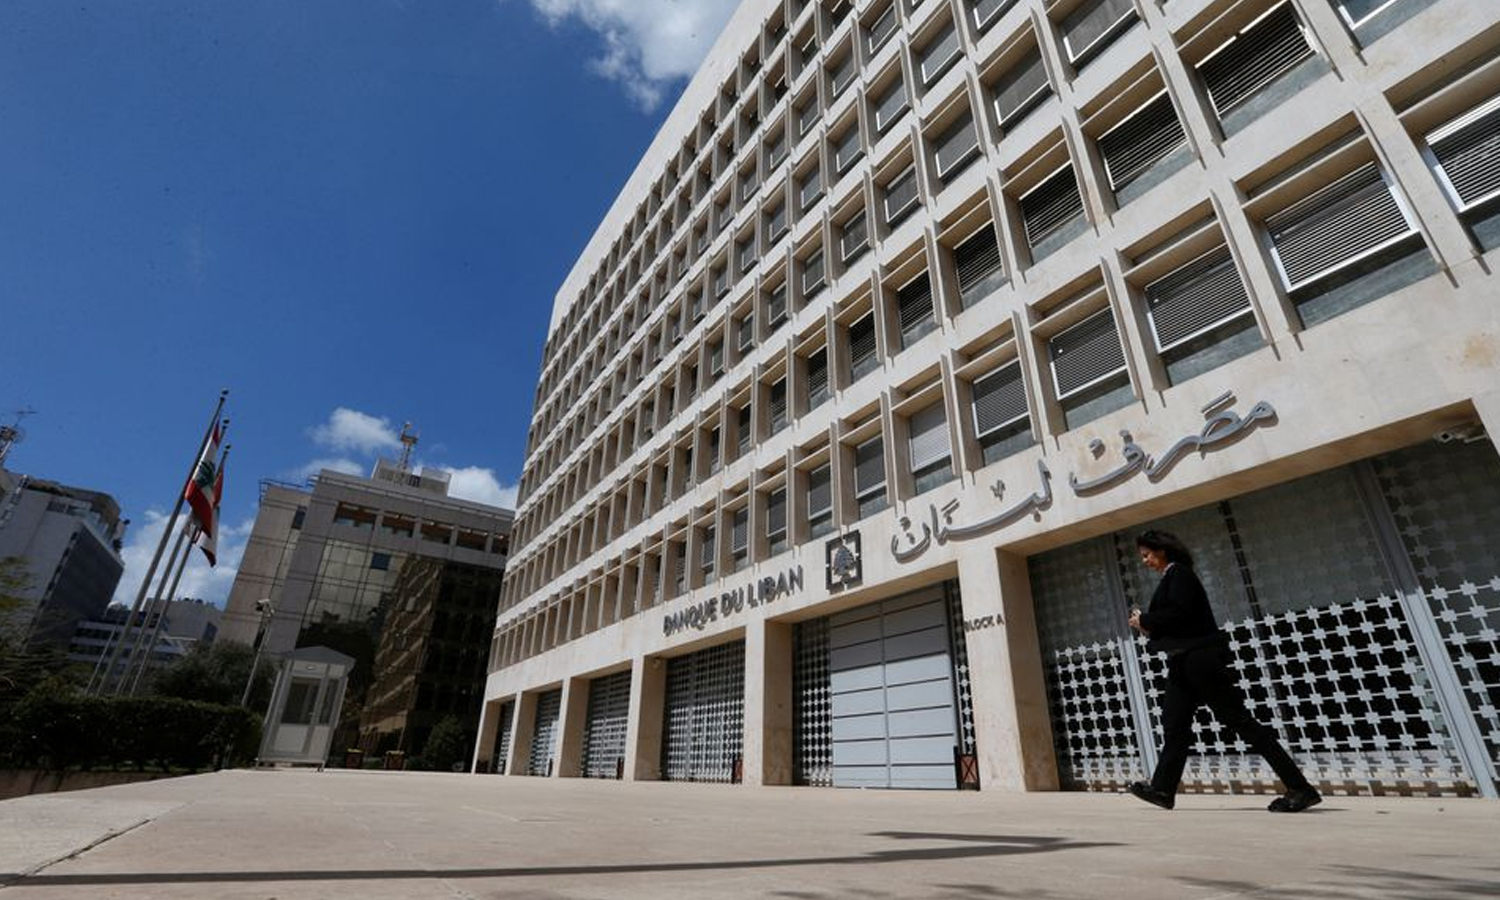 A woman walking in front of the Central Bank of Lebanon building in Beirut (Reuters)